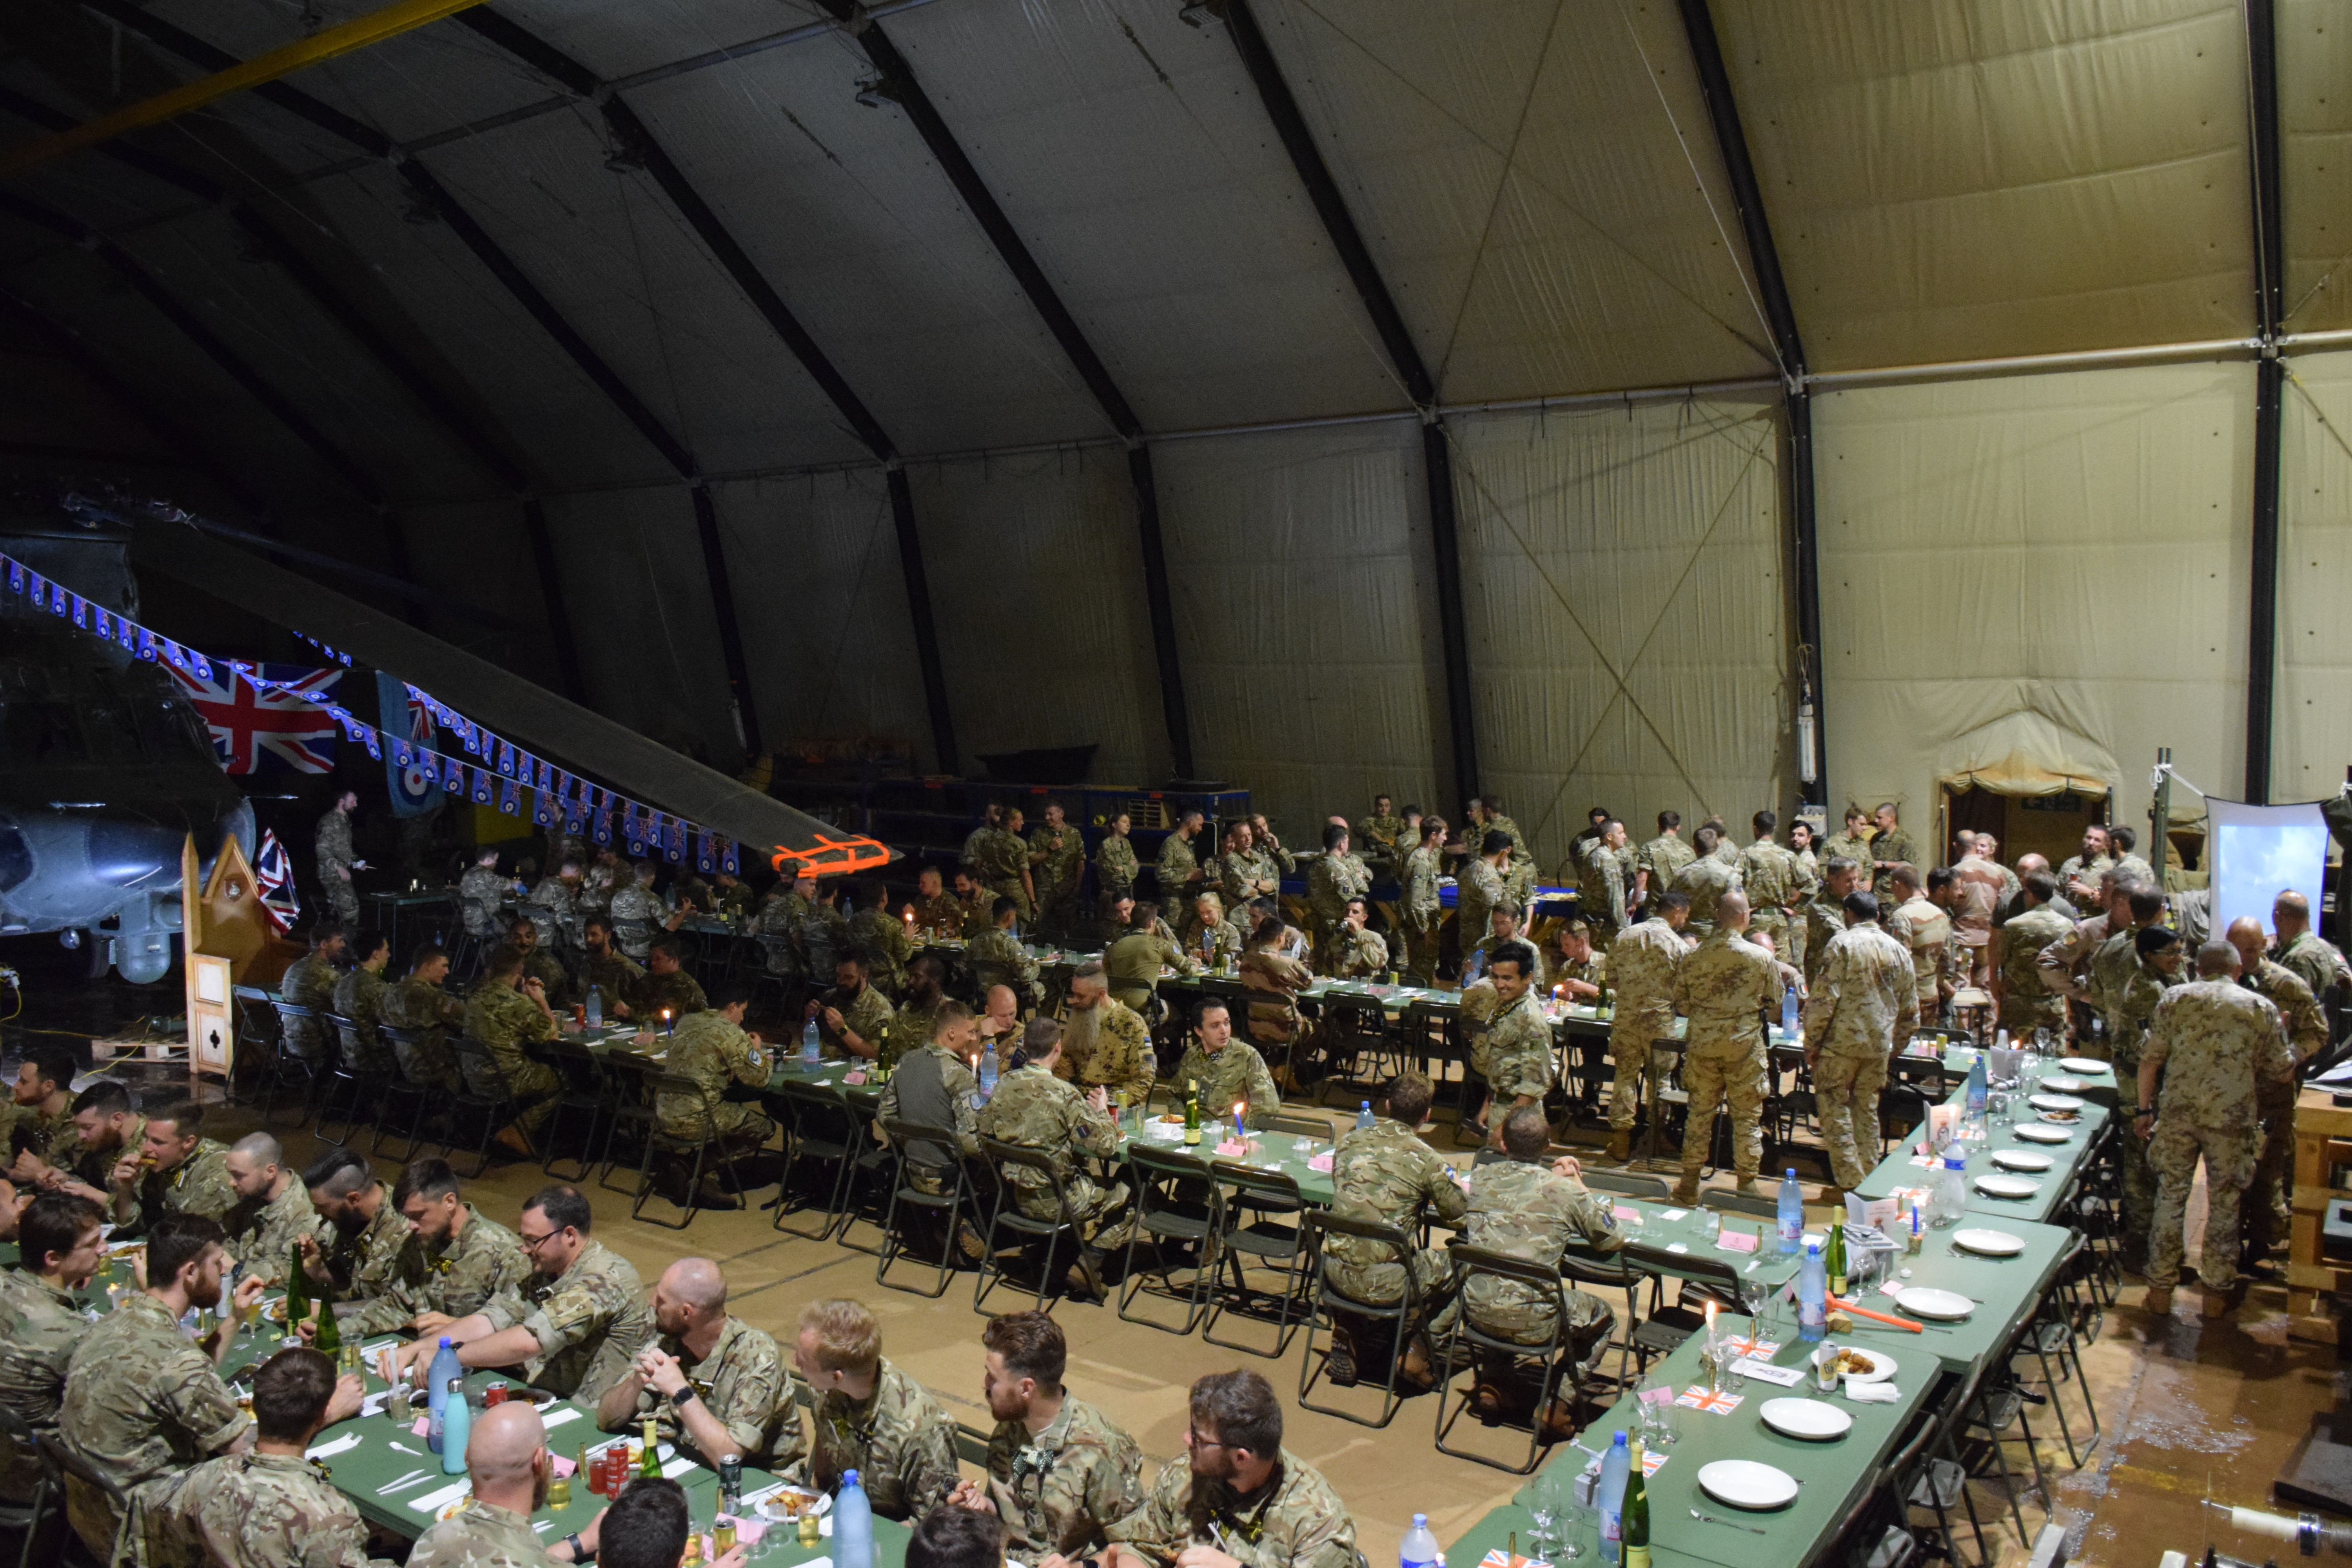 Personnel eating at row of tables inside a hangar, with a Chinook as a backdrop.